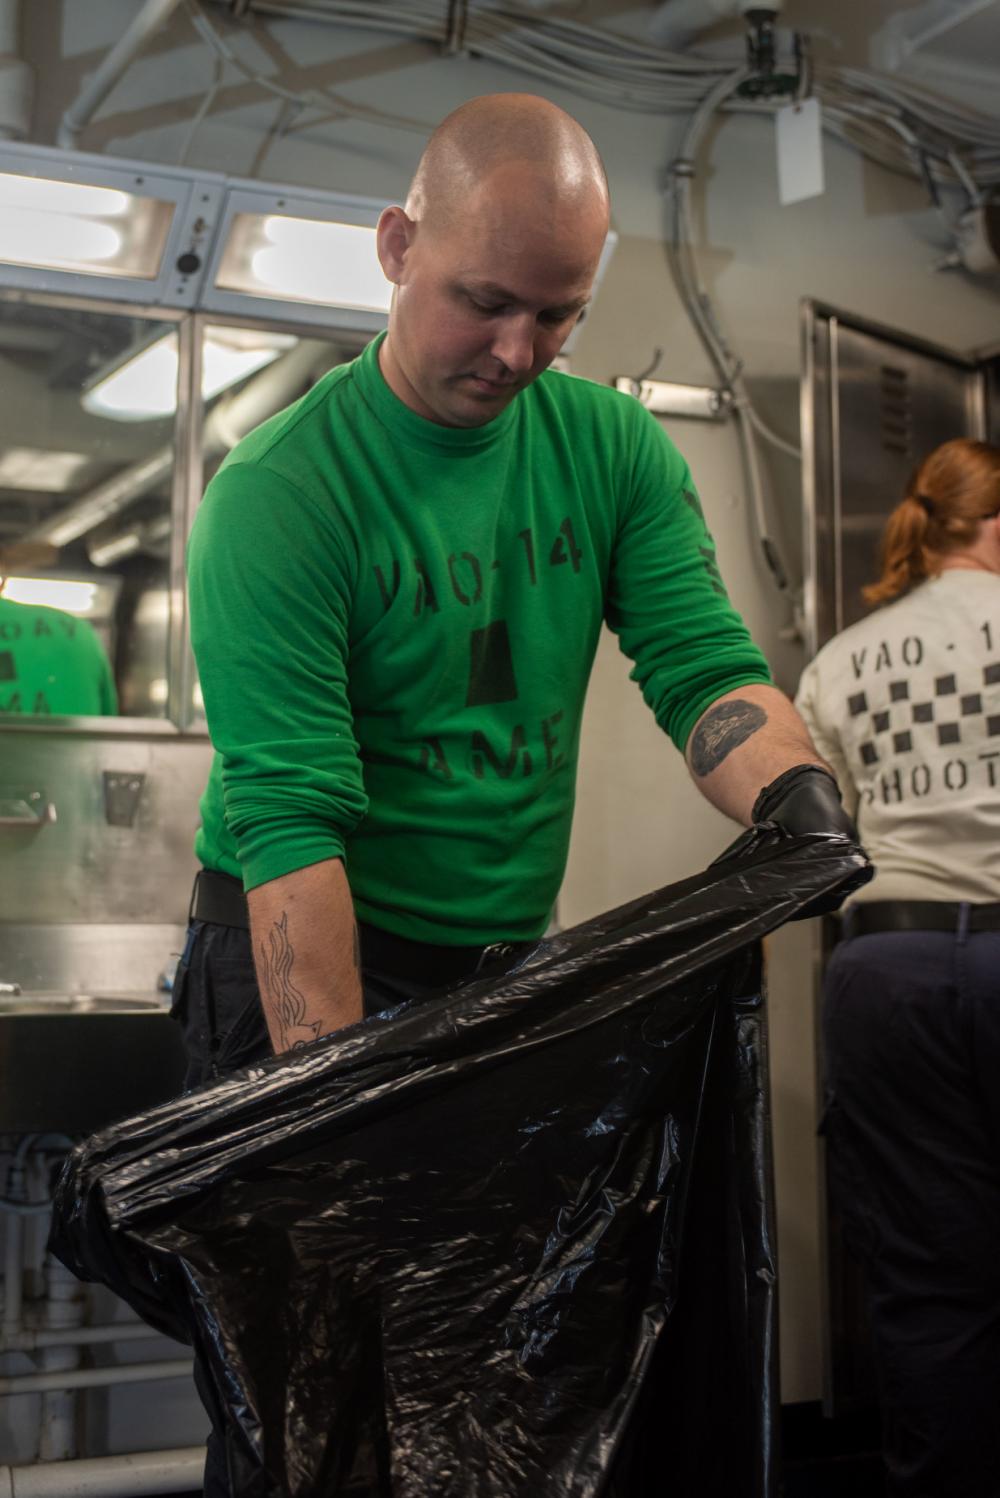 USS Ronald Reagan (CVN 76) Sailors participate in cleaning stations